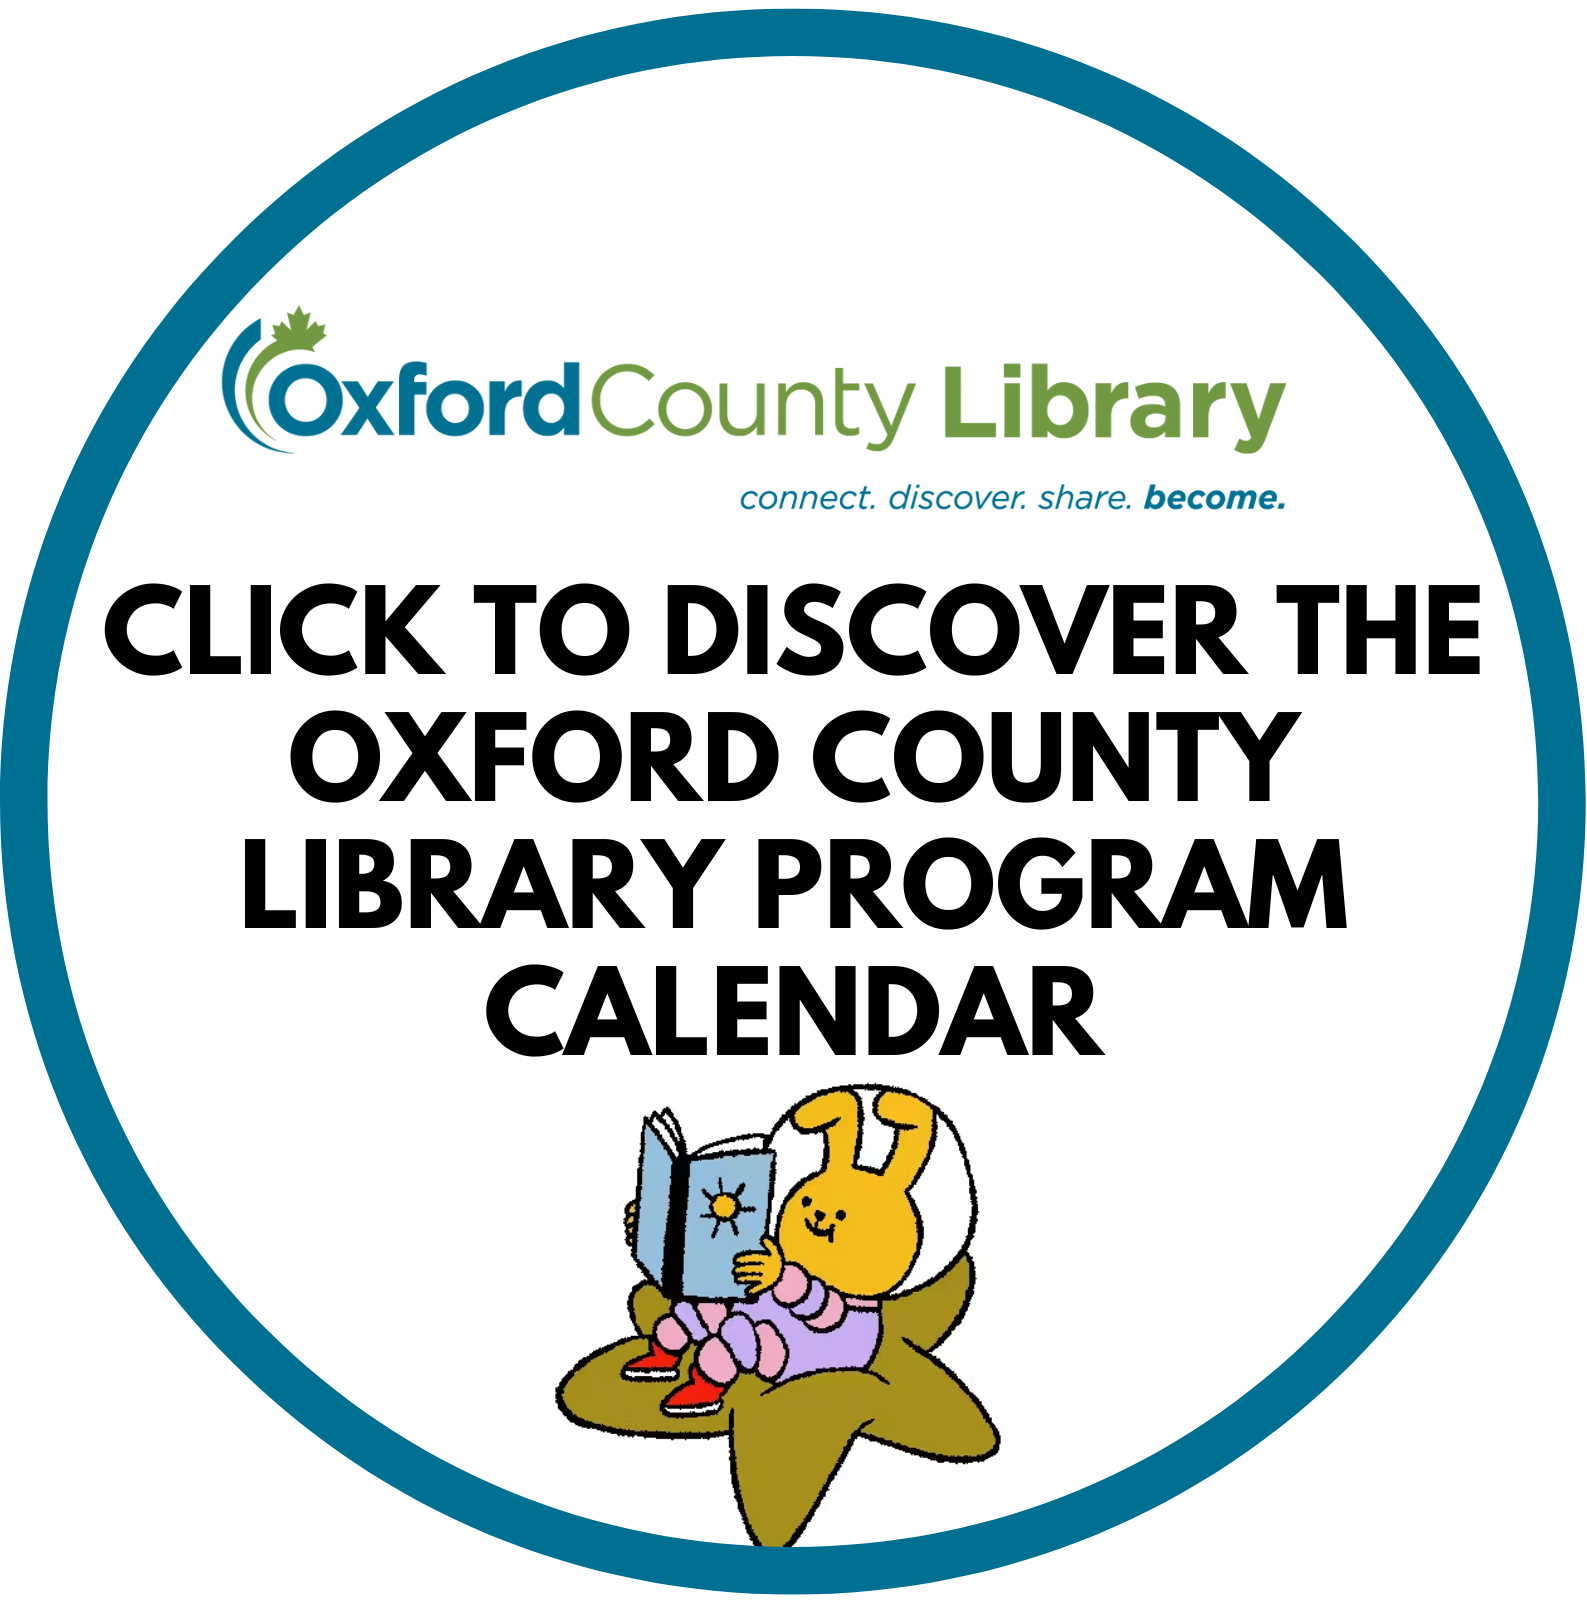 Click here to discover the Oxford County Library program calendar